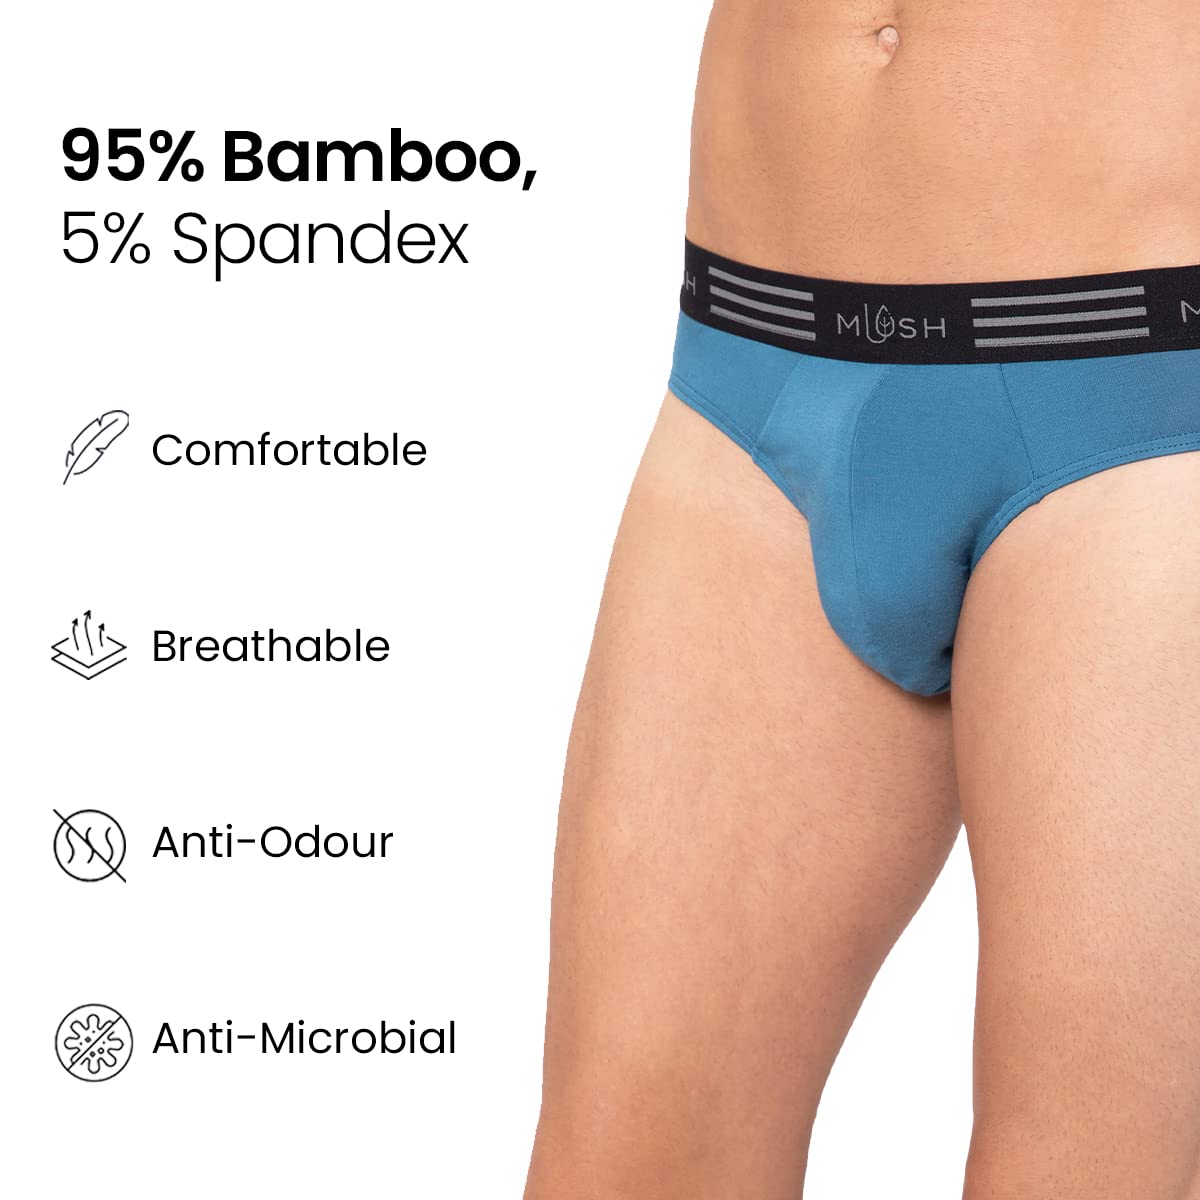 Mush Ultra Soft, Breathable, Feather Light Men's Bamboo Brief || Naturally Anti-Odor and Anti-Microbial Bamboo Innerwear Pack of 3 (L, Grey Blue and Black)